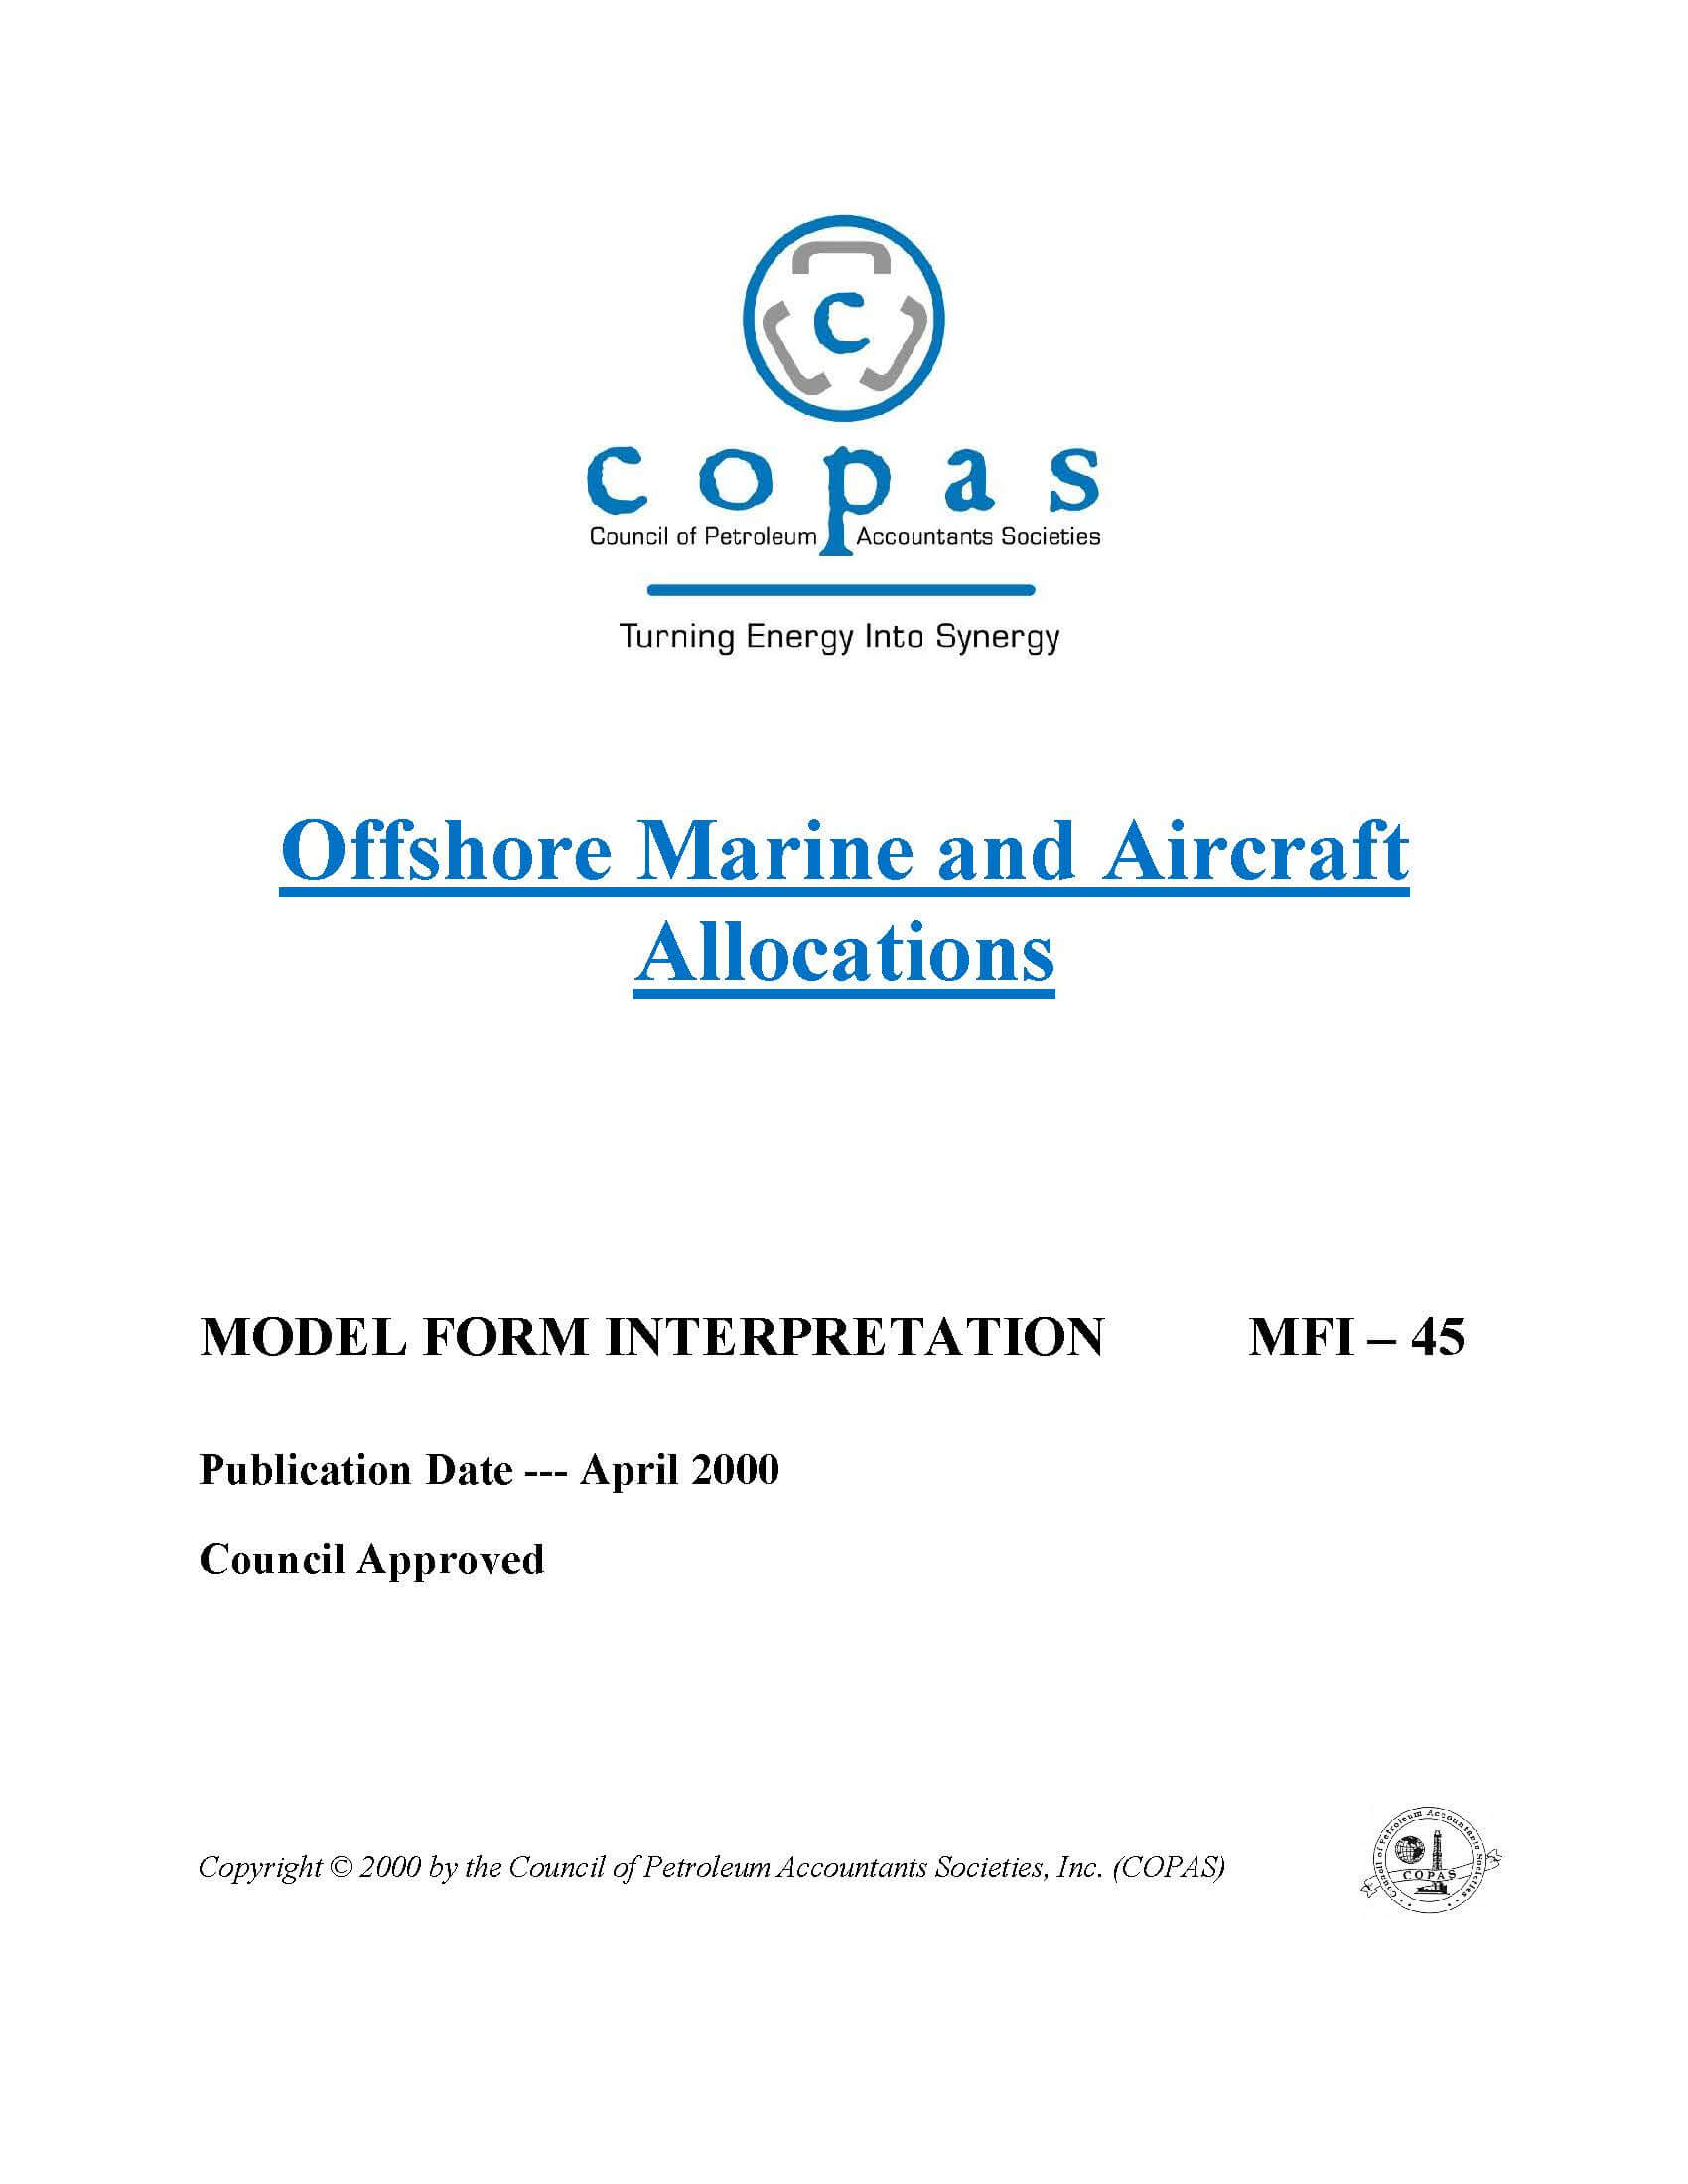 MFI-45 Offshore Marine and Aircraft Allocations - products MFI 45 Offshore Marine and Aircraft Allocations - Council of Petroleum Accountants Societies